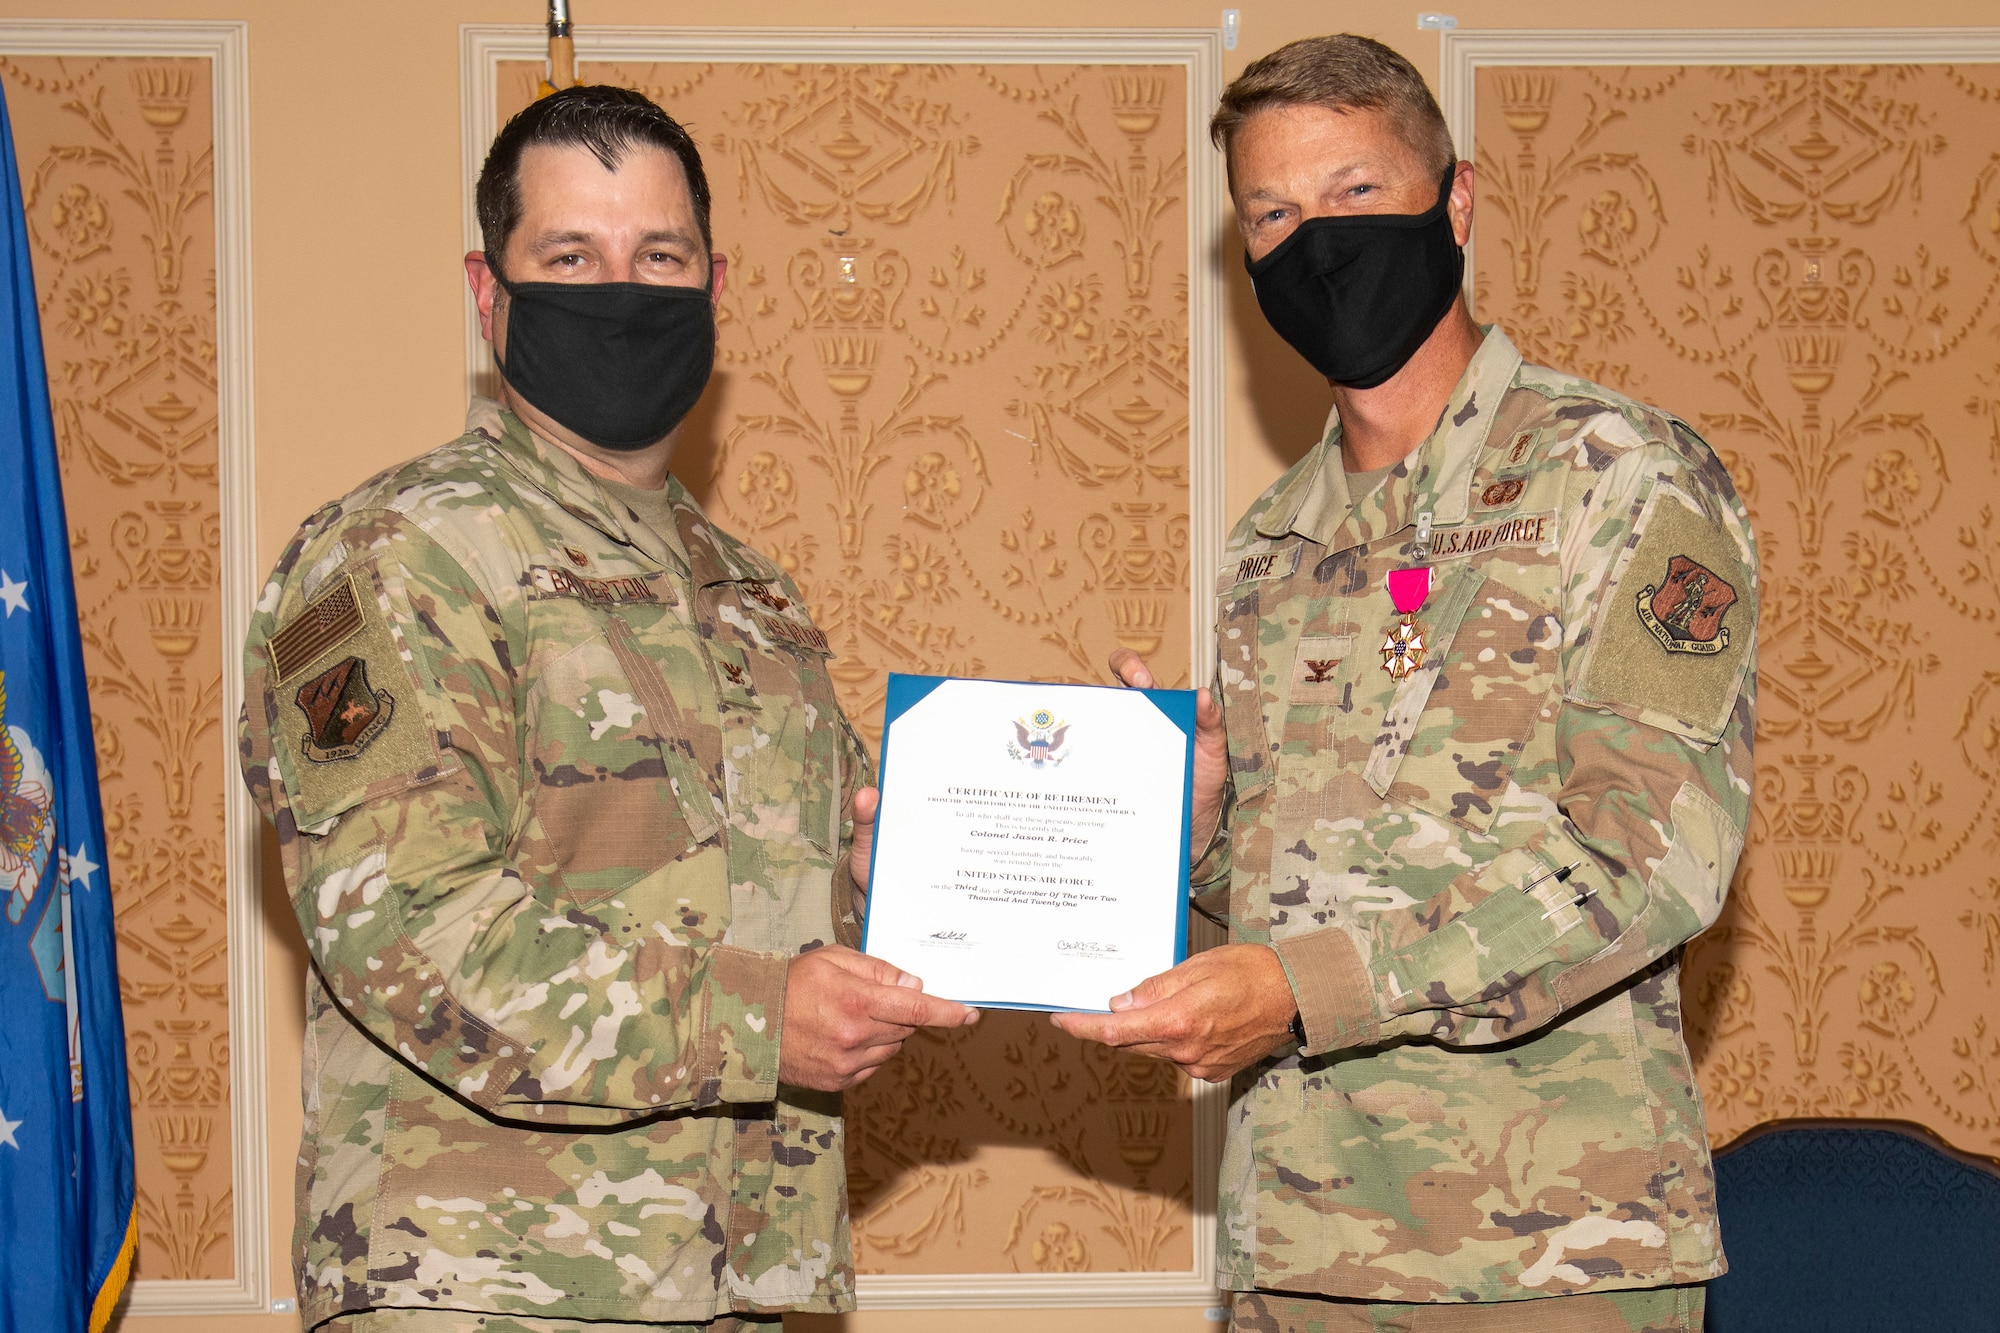 Col. Christopher G. Batterton, 192nd Wing commander, left, and Col. Jason R. Price, outgoing 192nd Medical Group commander, pose for a photo holding Price's certificate of retirement.